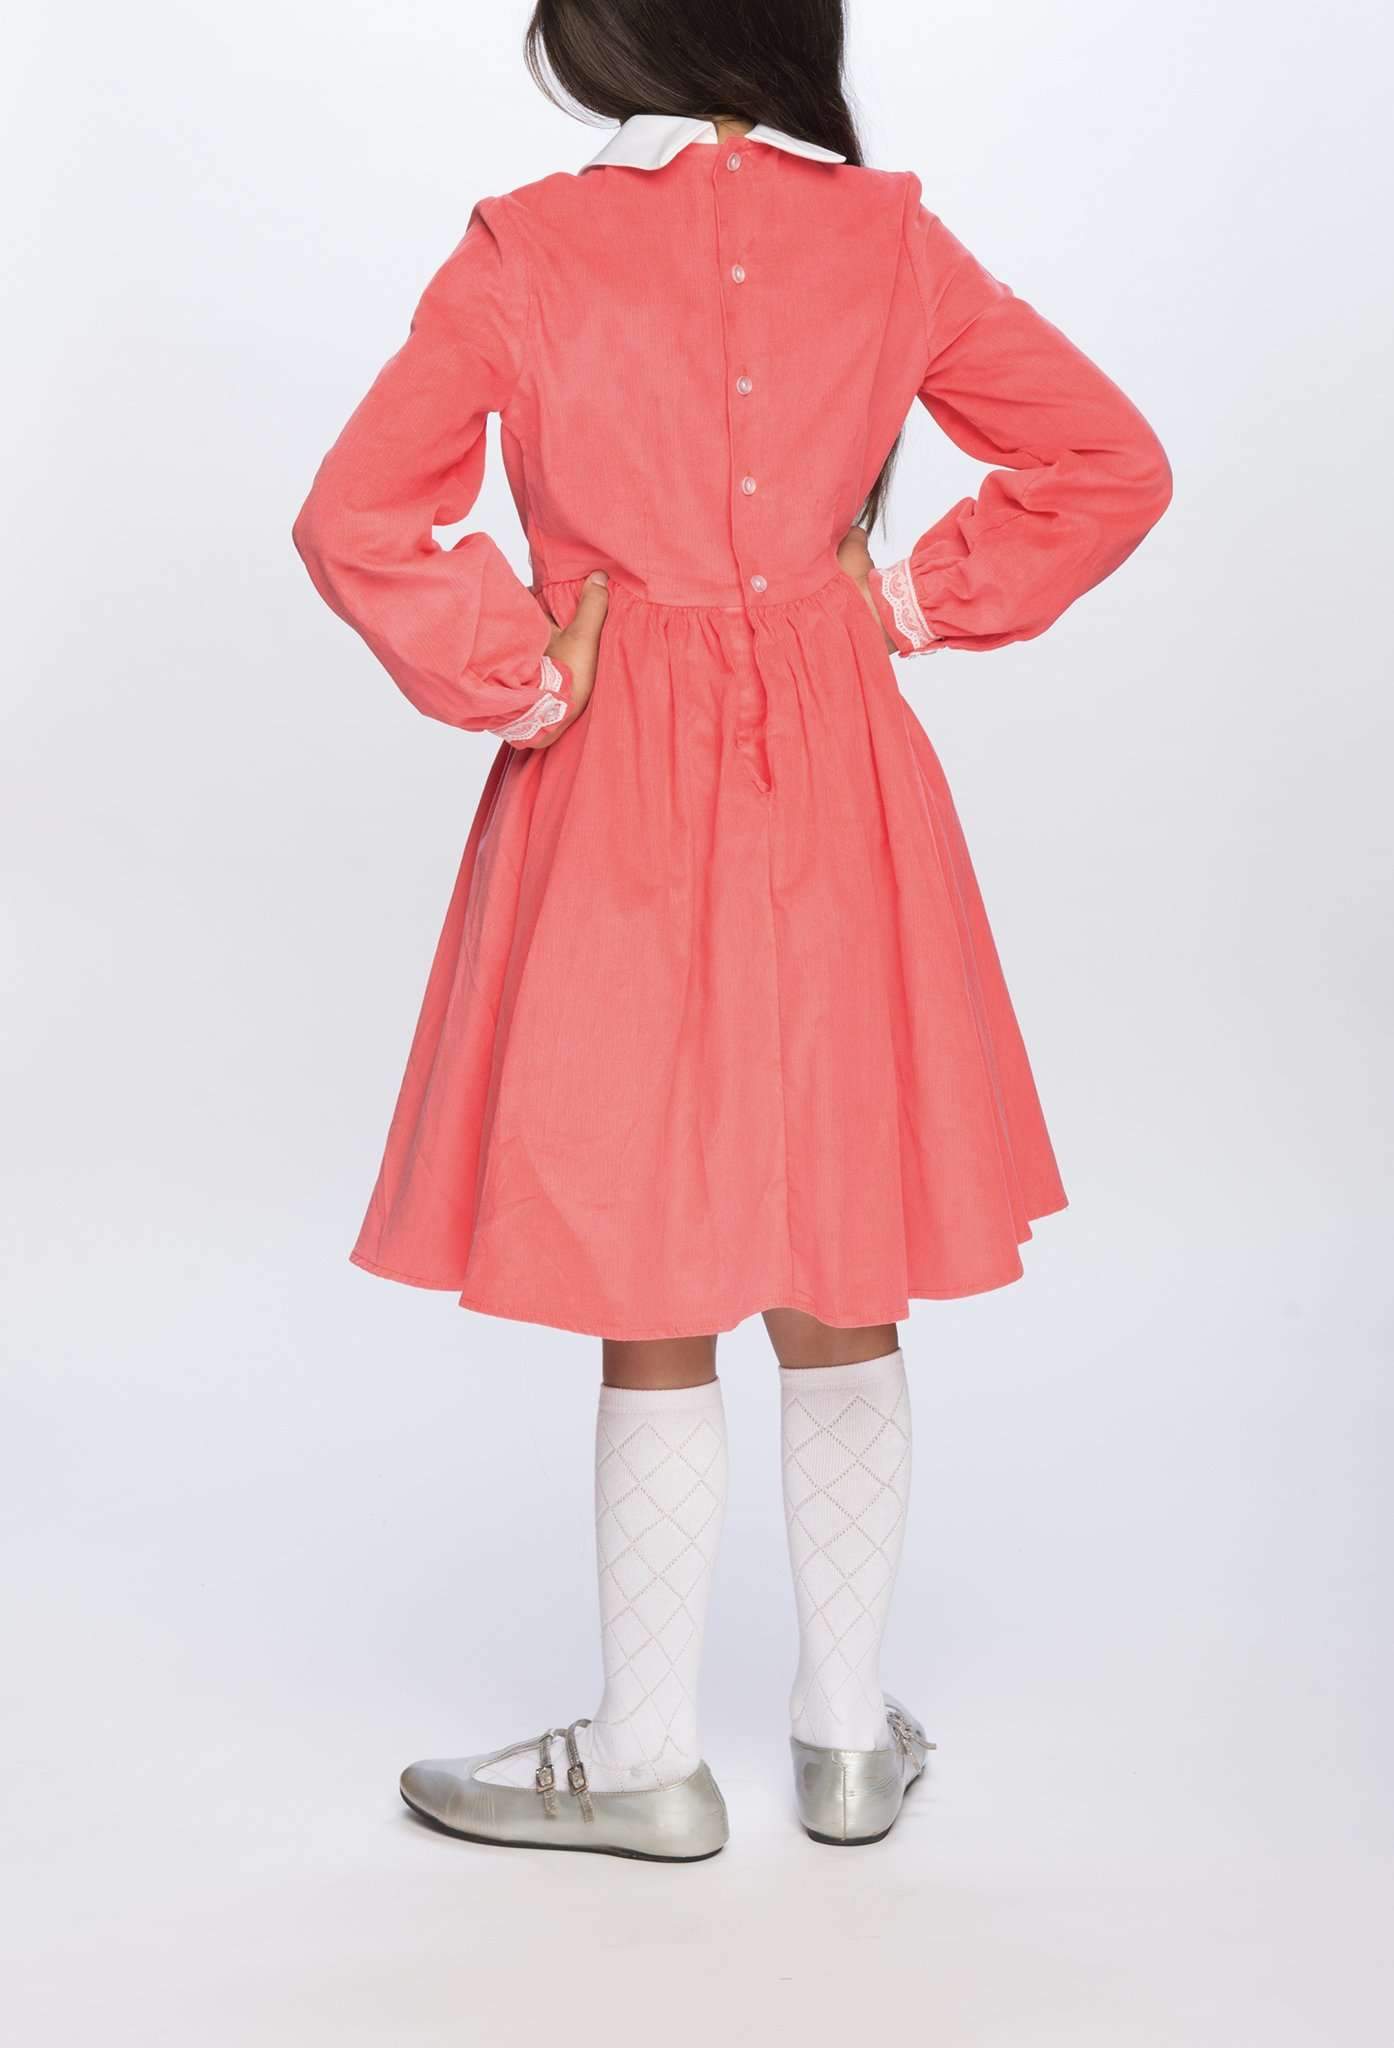 Payton Dress in Coral Classic Girl Clothing